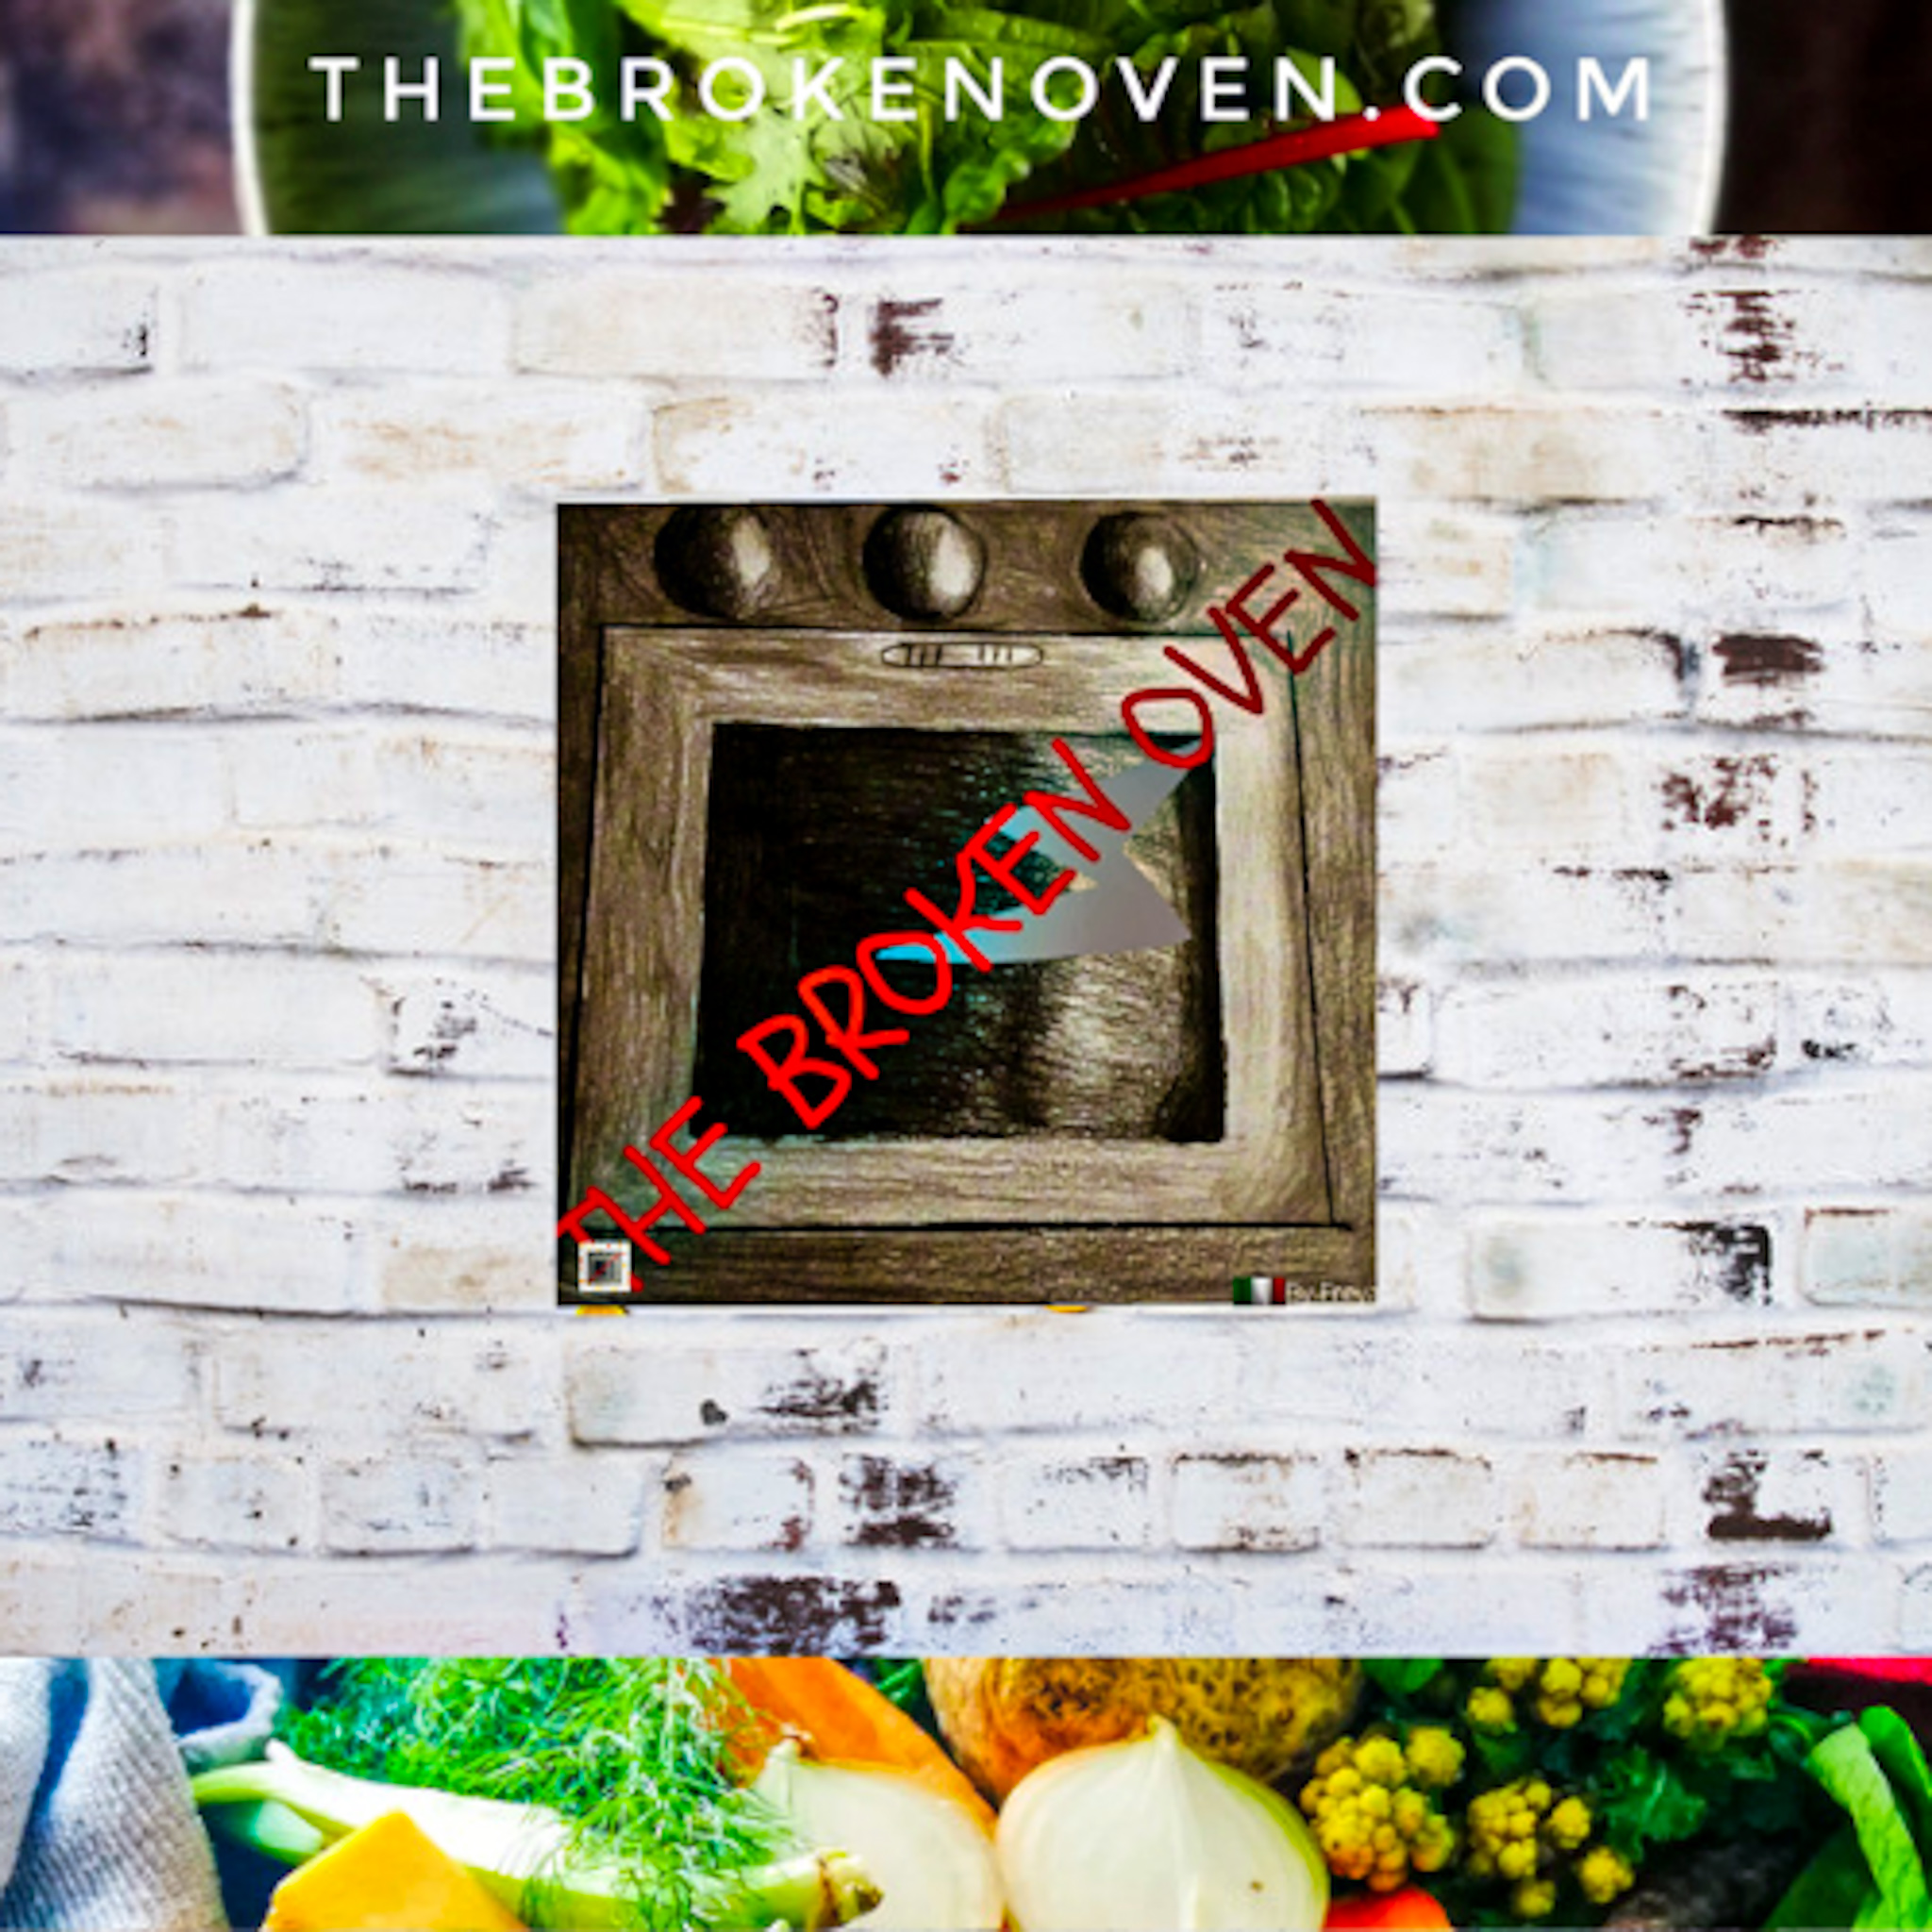 Logo, sketch of oven, food photography vegetable banner bottom, salad top banner, background white brick wall,